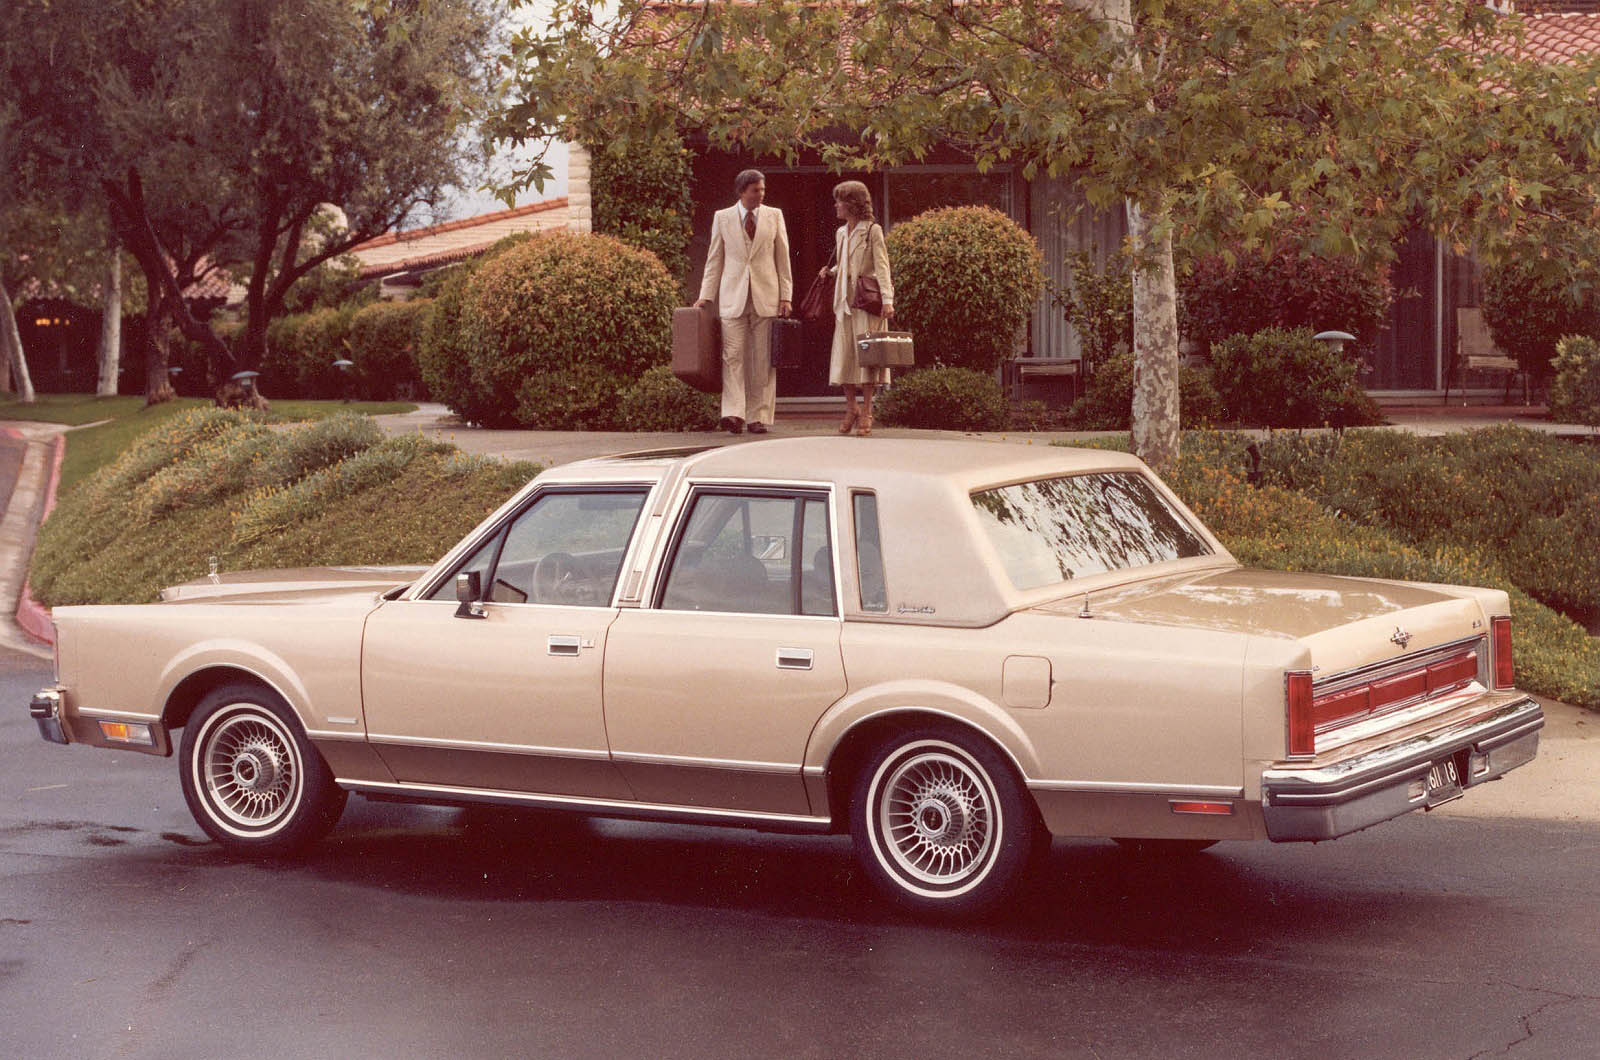 <p>Parent company Ford’s intentions for this Lincoln were clear when it decided on the Town Car name. The Lincoln lived up to the name thanks to its <strong>generous proportions</strong> and fully laden interior specification. Some early models even included a digital dash and <strong>keypad entry</strong> system, though later models grew more conservative in design.</p><p>It also spawned a host of genuine limo versions so beloved of <strong>tourists</strong> and night parties.</p>